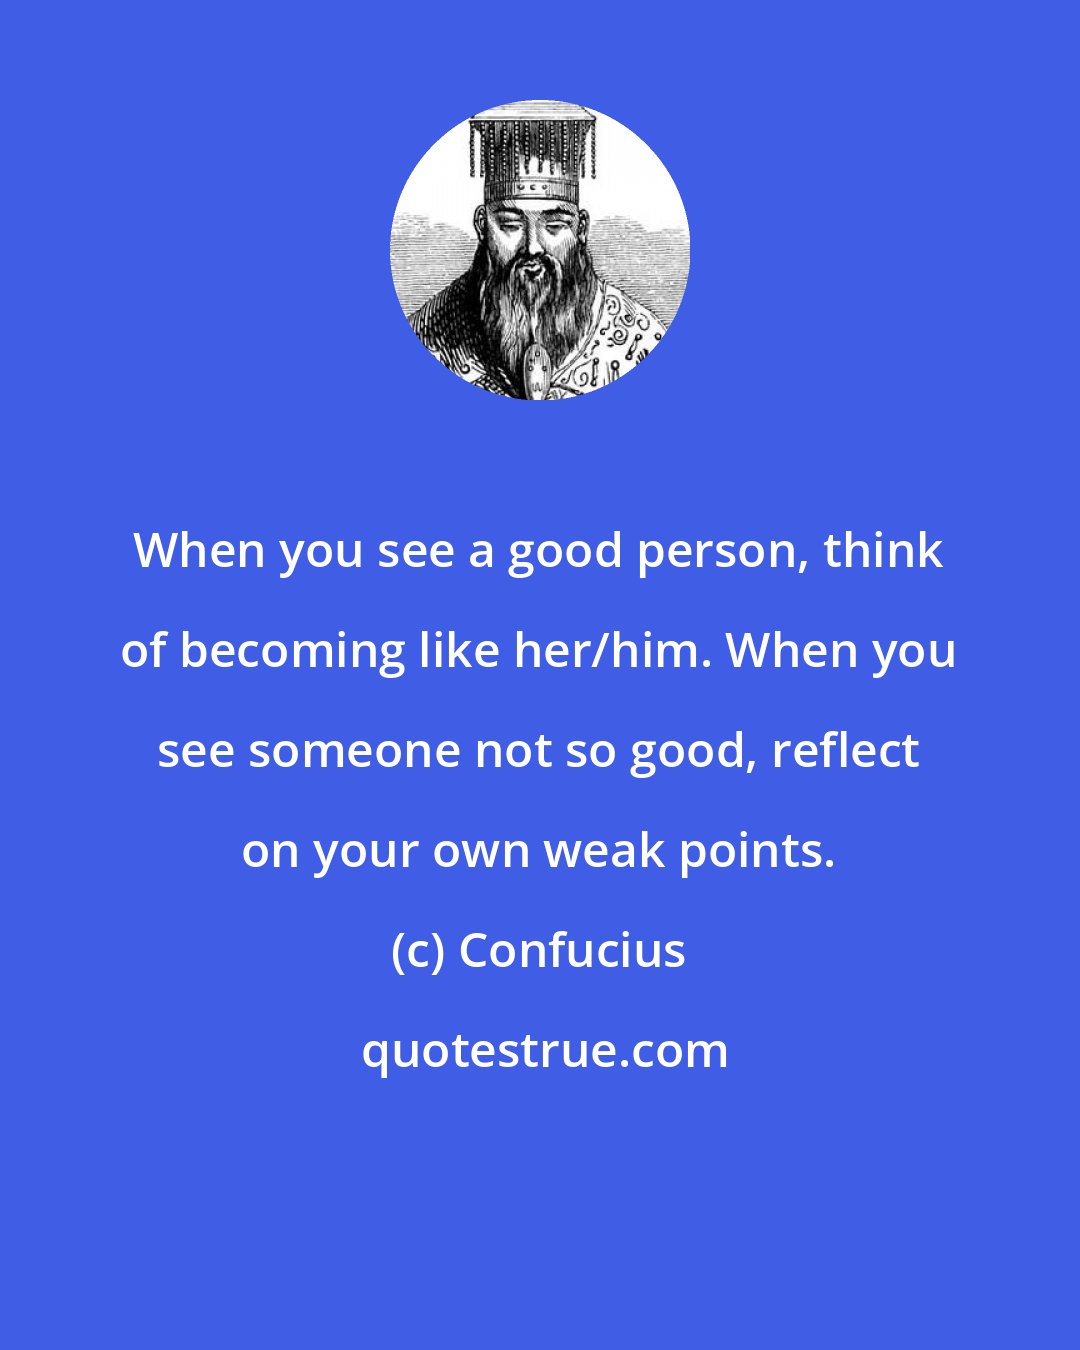 Confucius: When you see a good person, think of becoming like her/him. When you see someone not so good, reflect on your own weak points.